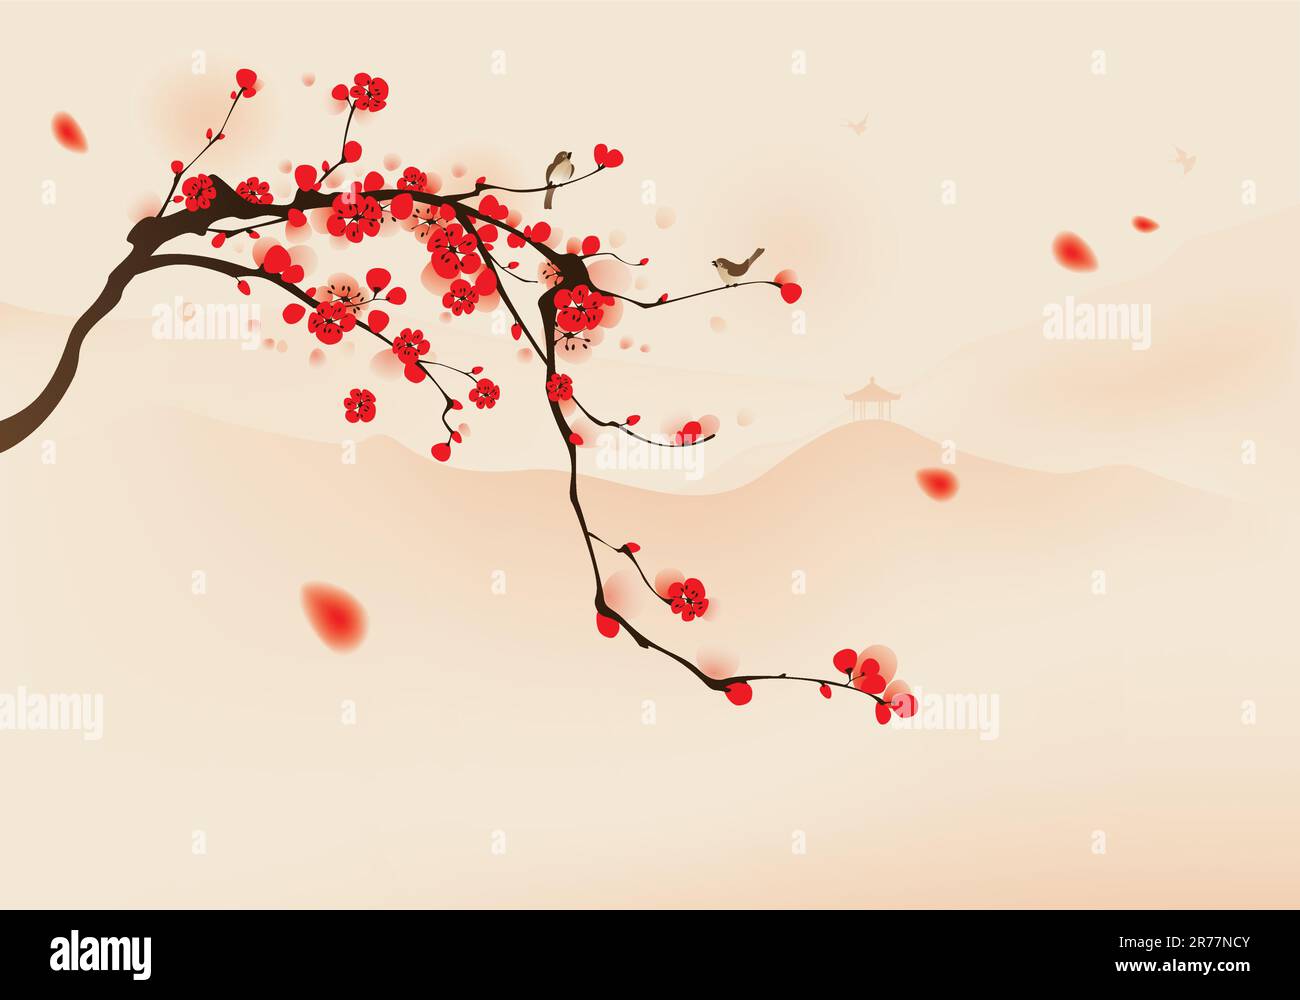 Birds resting on the branches of plum blossom tree with hills background. Vectorized brush painting. Stock Vector